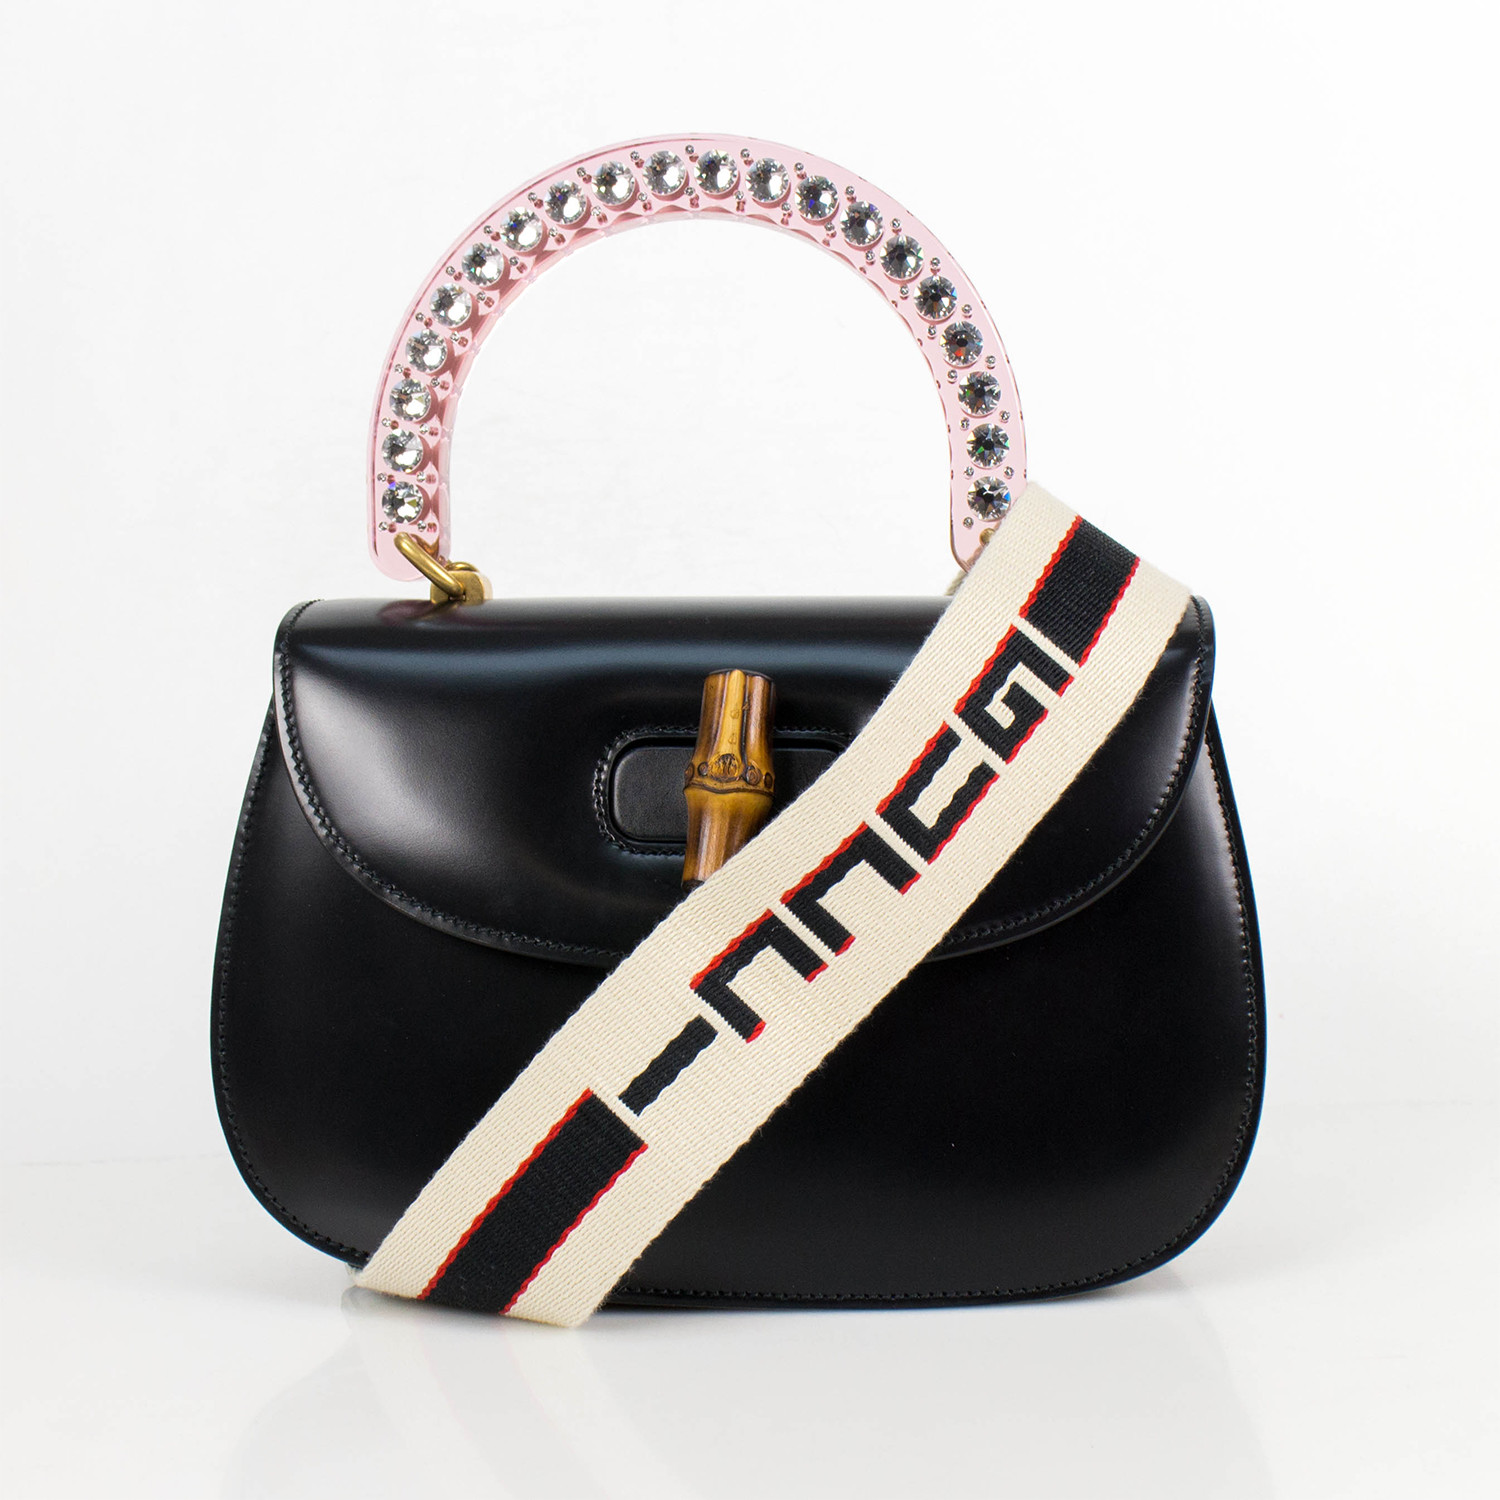 Gucci Leather W/ Attachable Shoulder Strap Bamboo Medium Top Handle Bag - The Designer ...